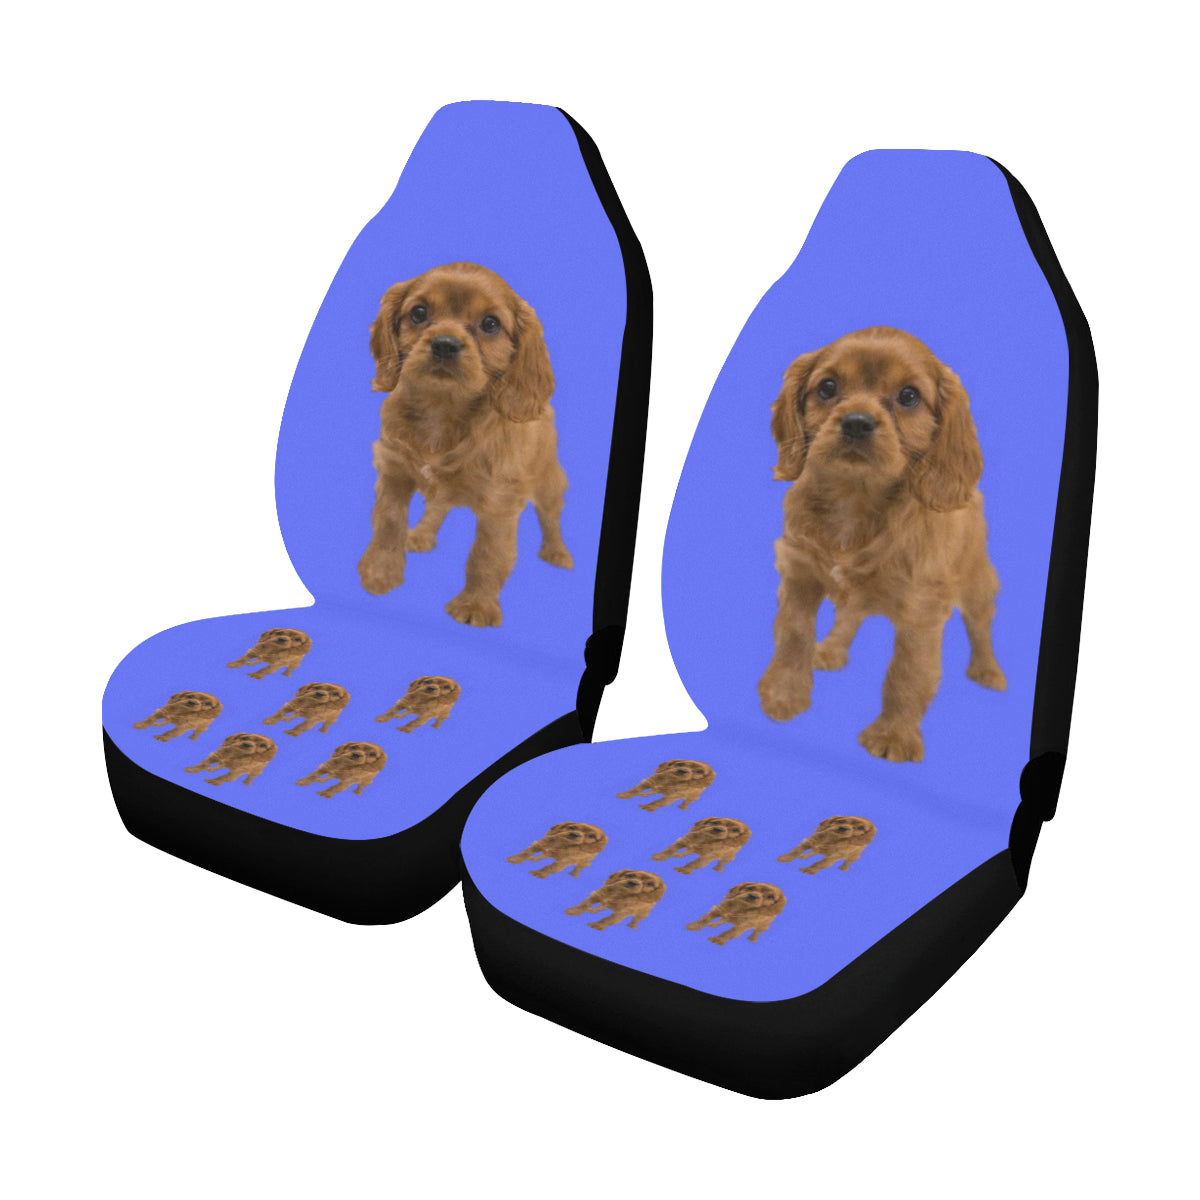 Cavalier King Charles Spaniel Car Seat Covers - Ruby (Set of 2)